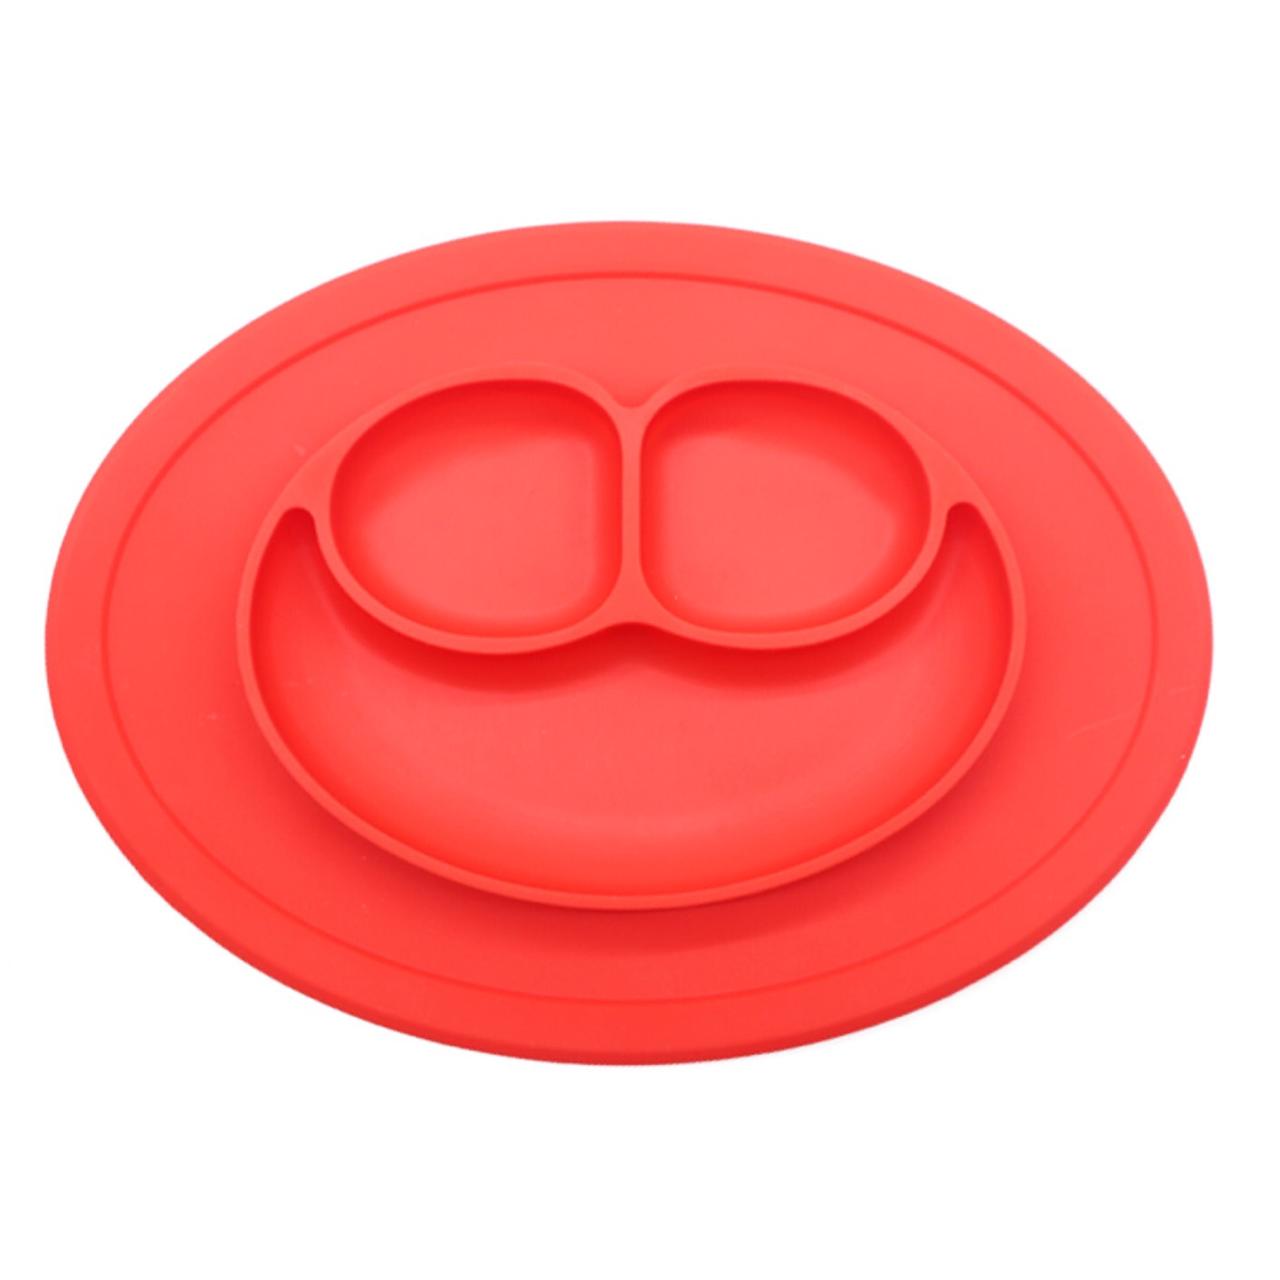 Silicone-Suction-Plate-the-elephant-in-a-box-1